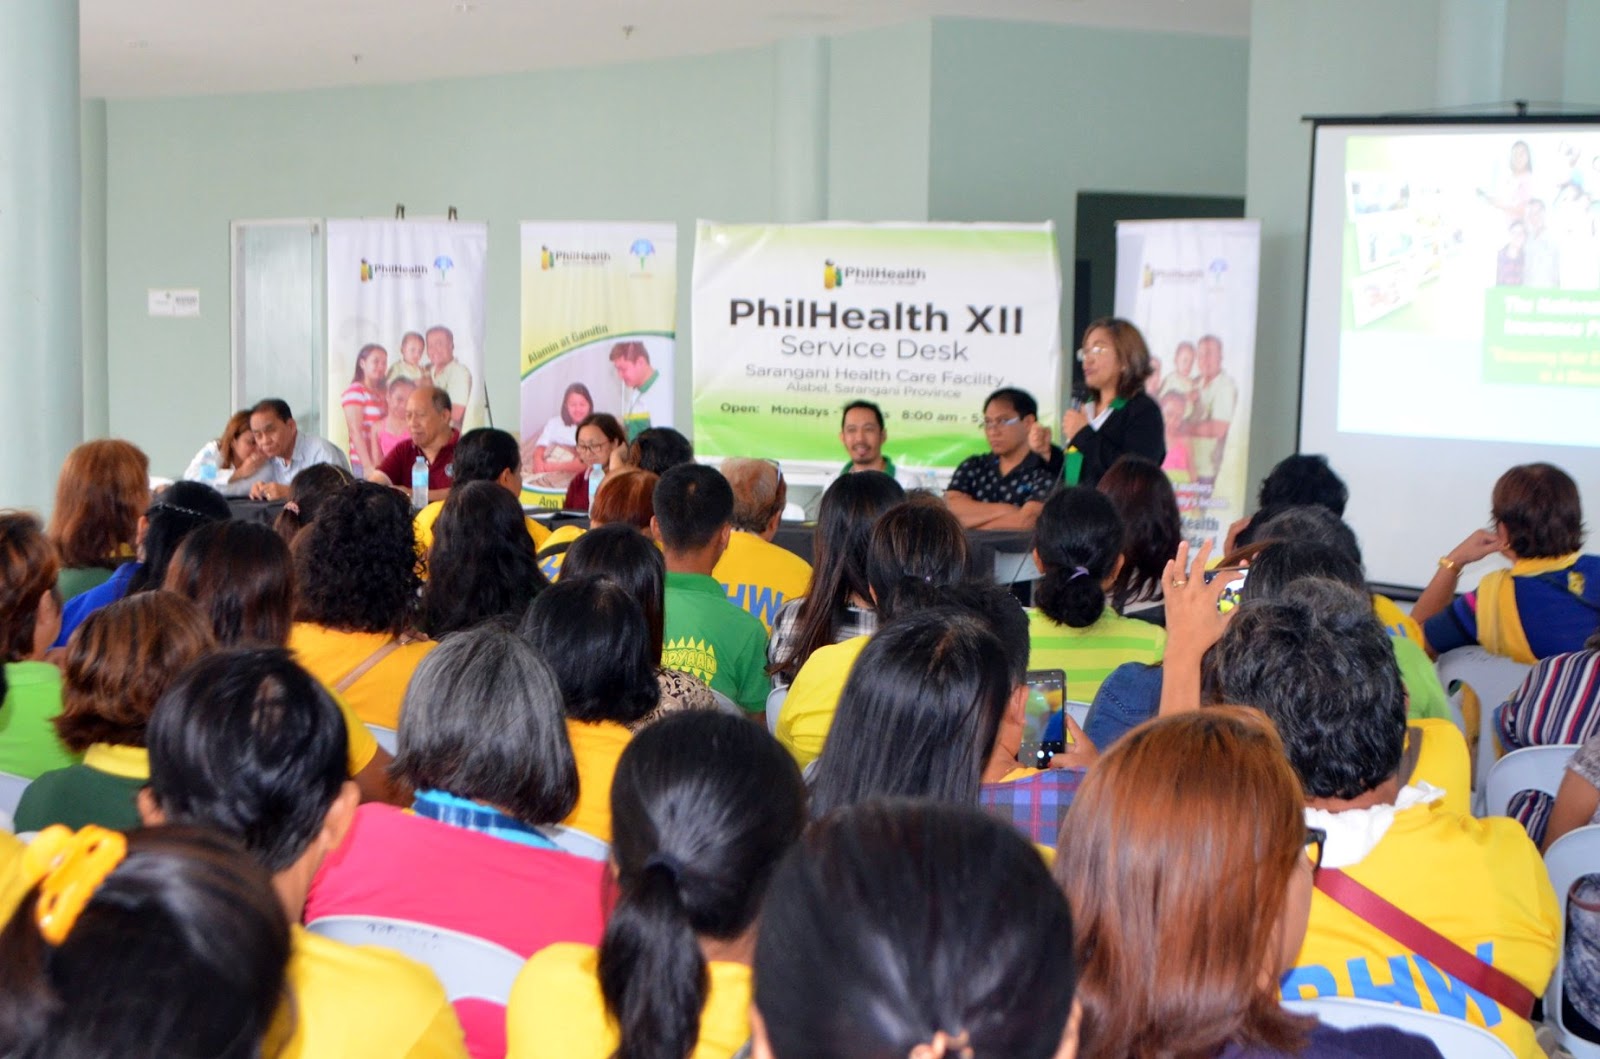 PhilHealth XII  Service Desk in Alabel Opens